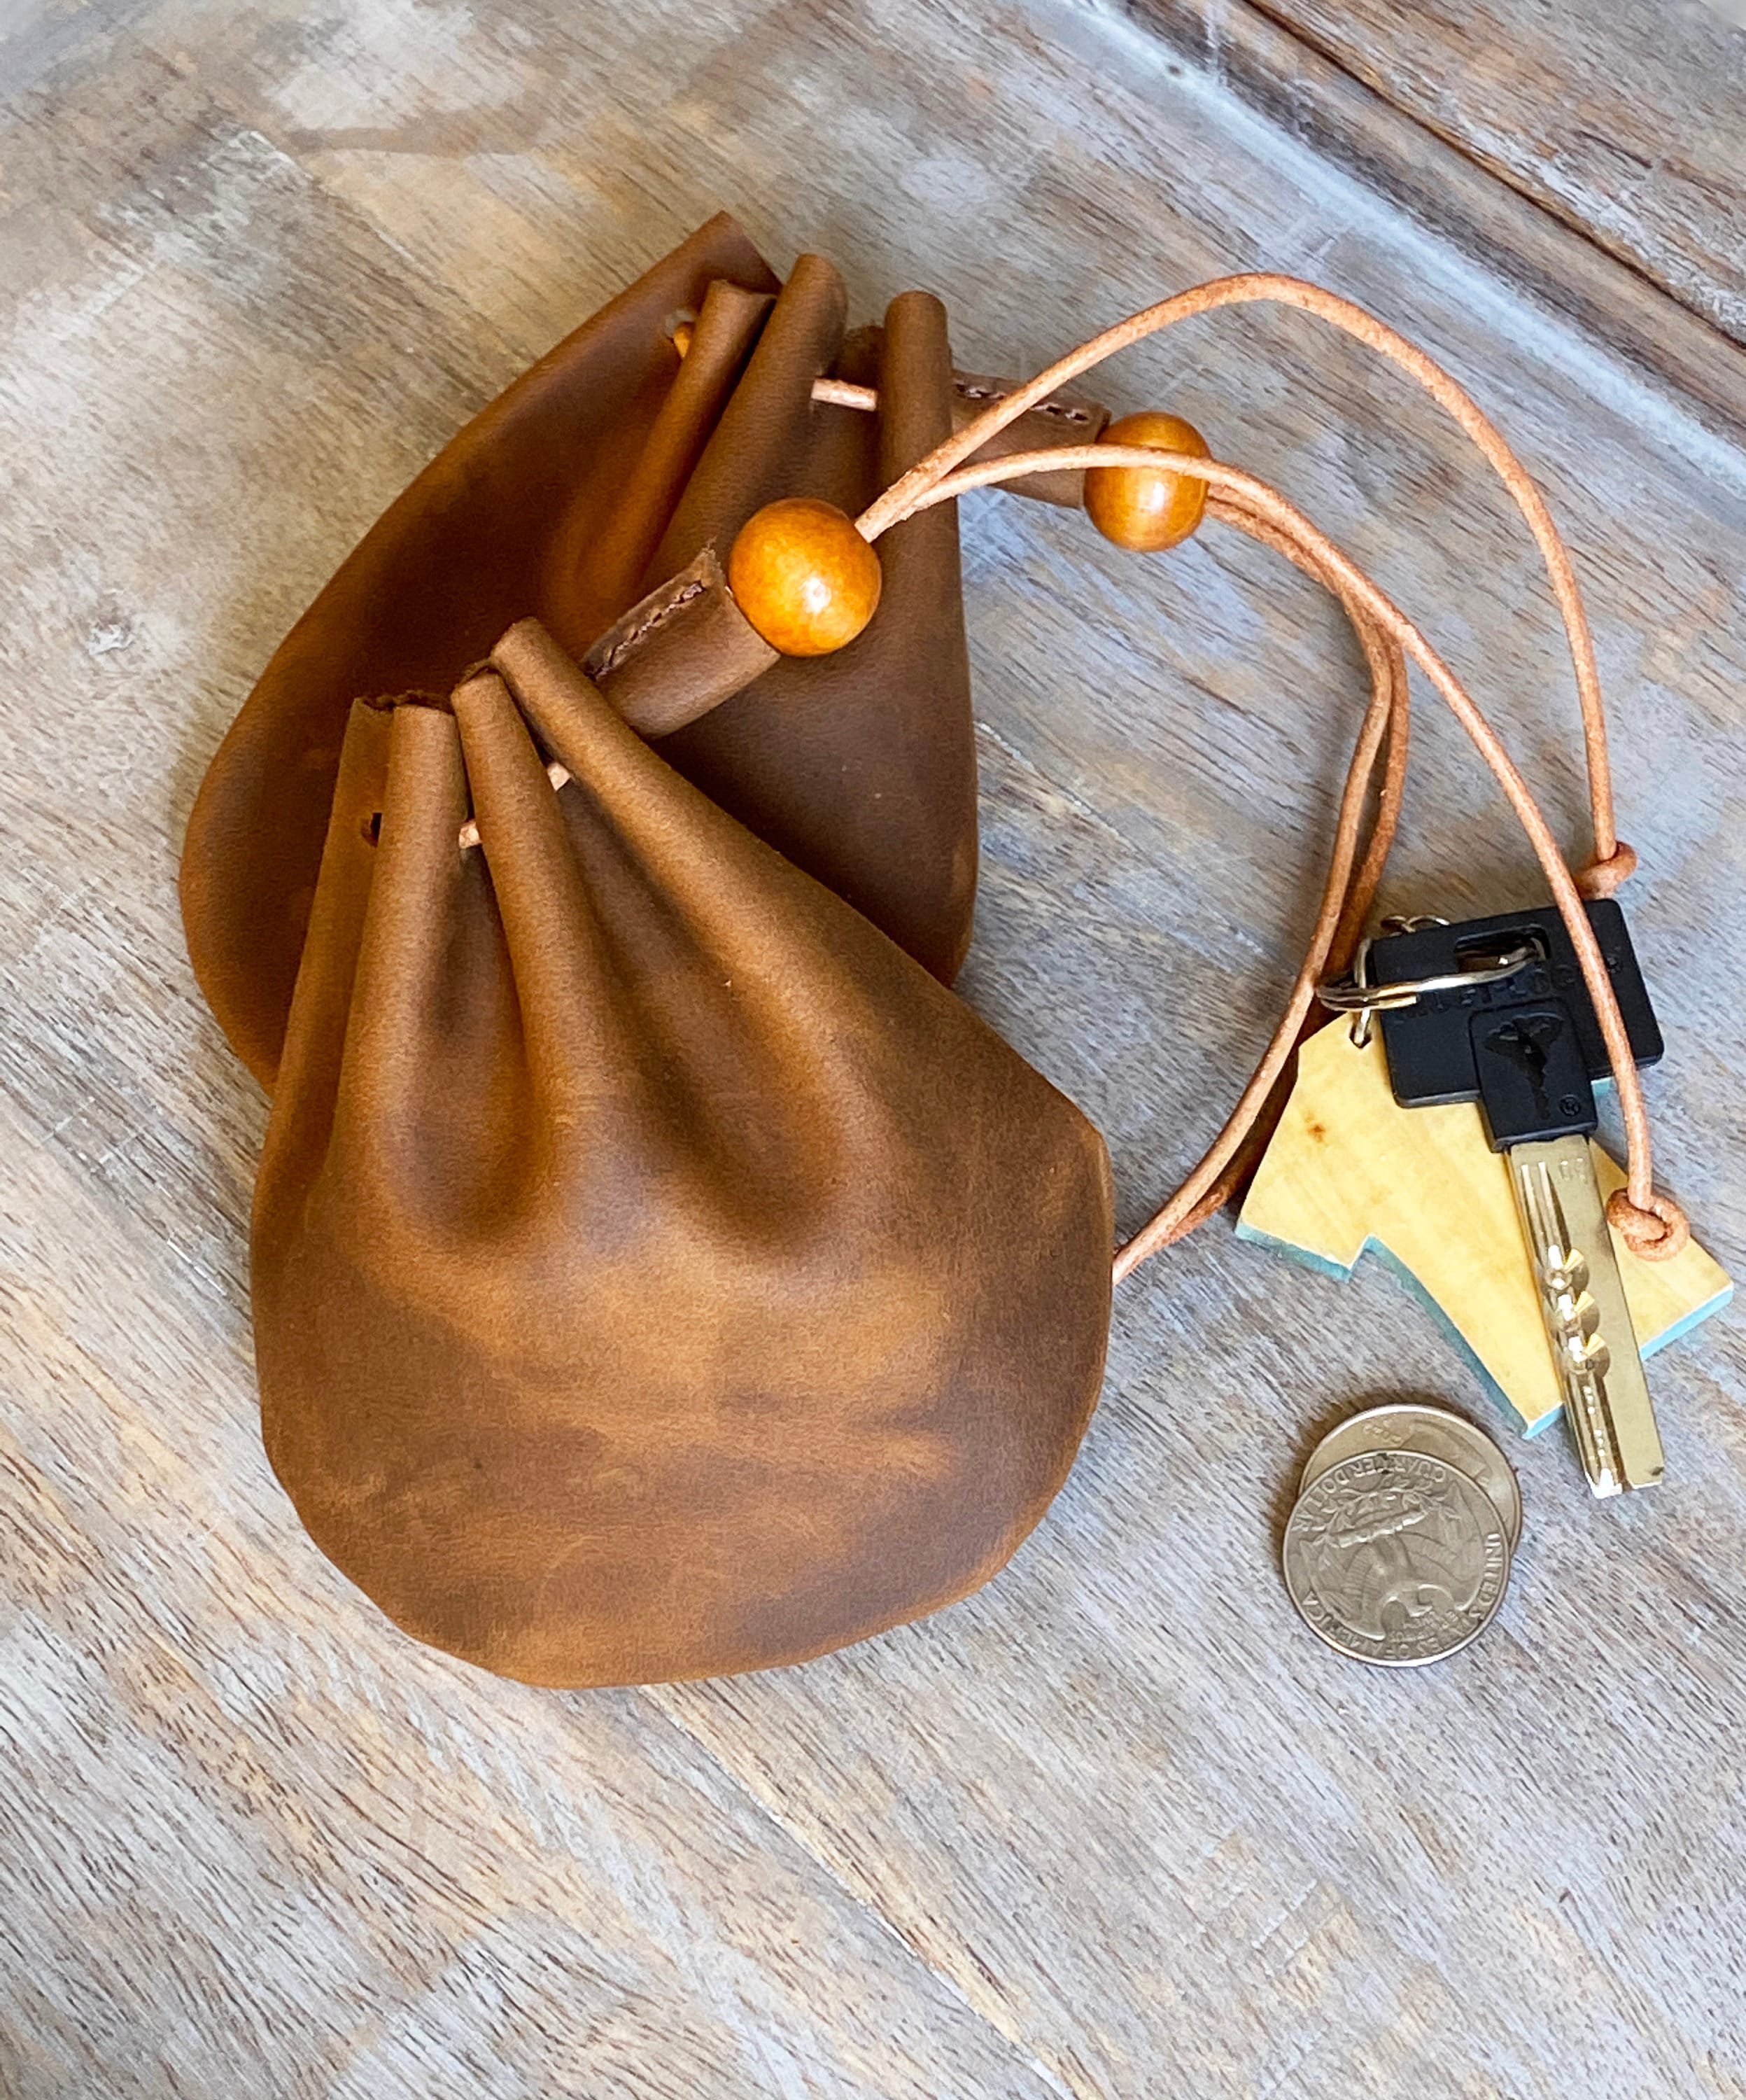 Drawstring Leather Pouch, Coin Purse, Dark Brown, Leather Pouch